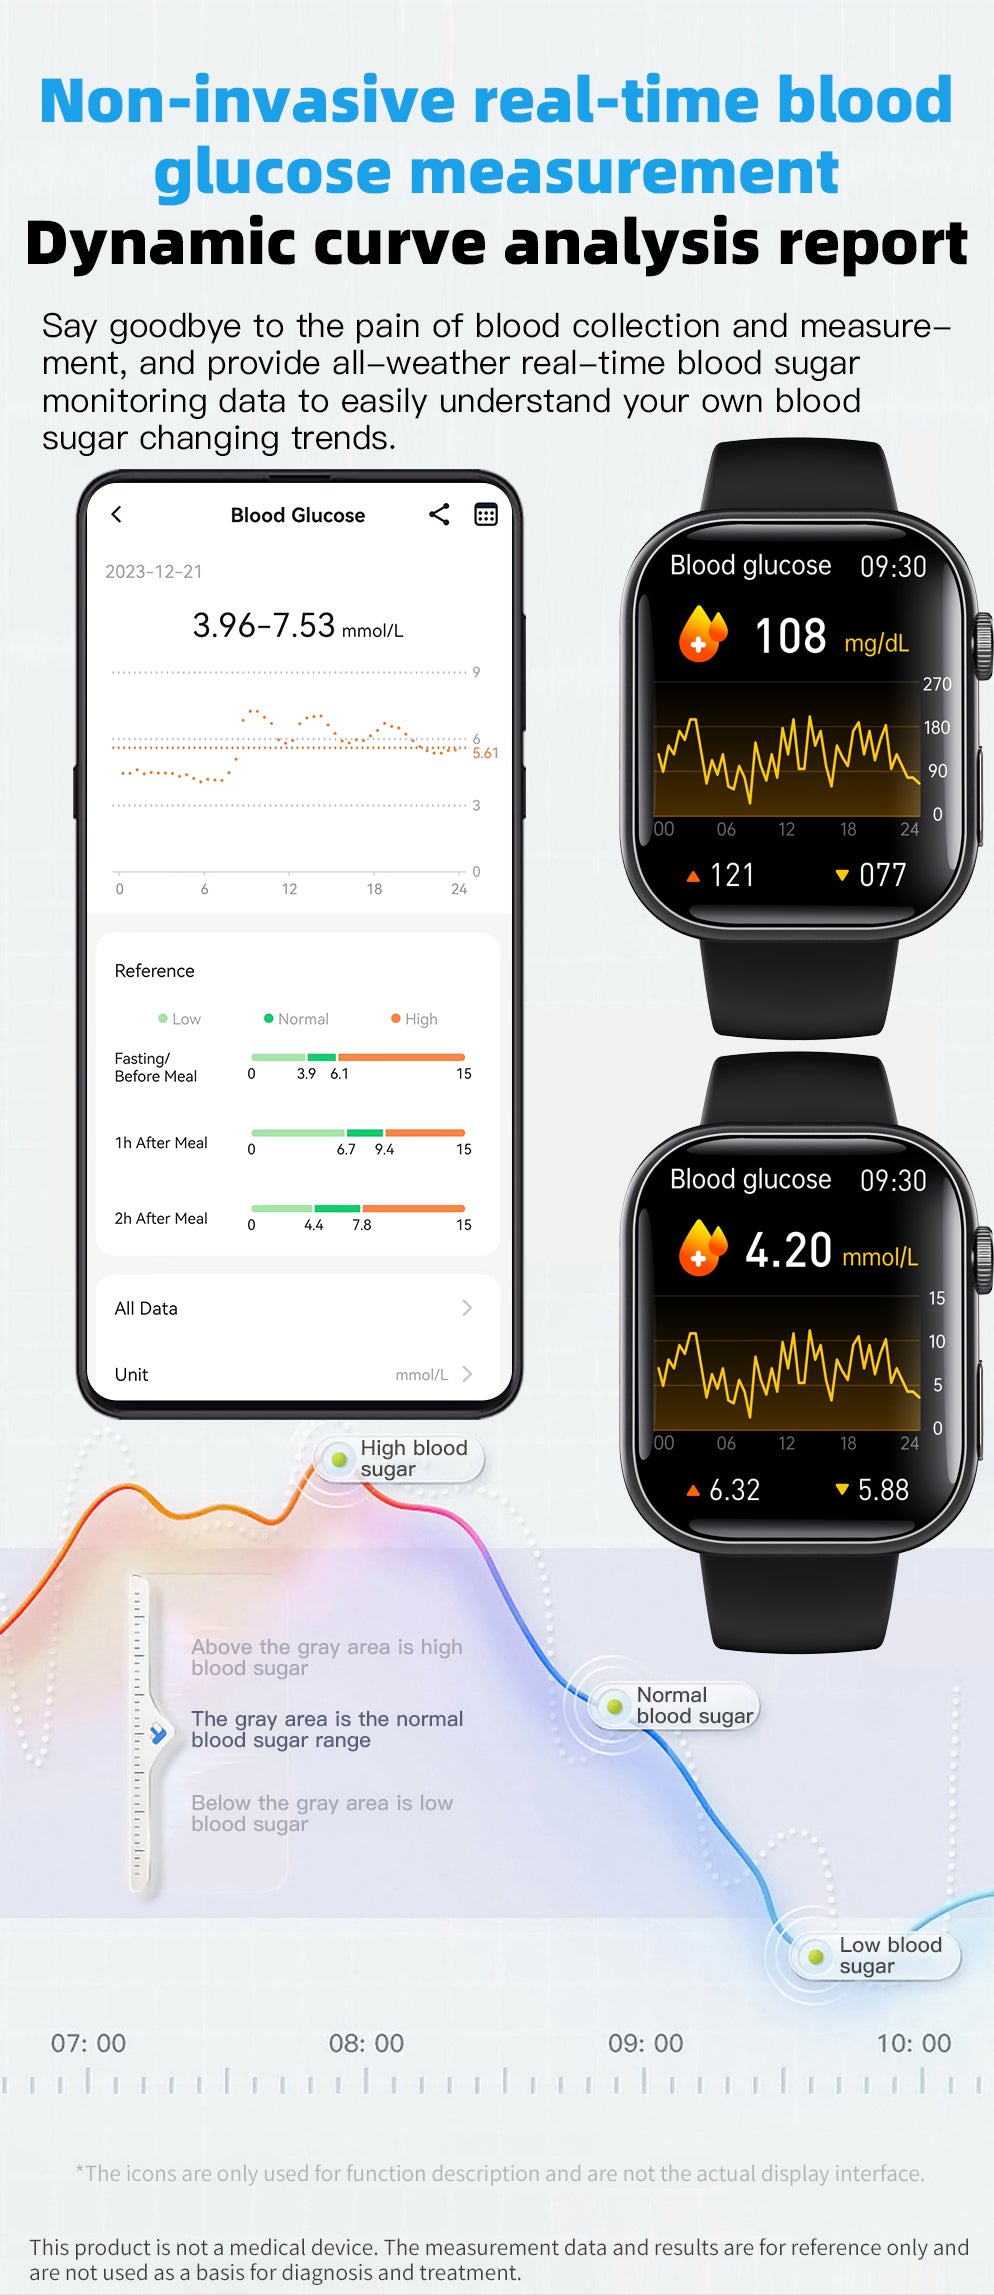 Best ECG Smart Watch of 2024 With Blood Pressure Monitor+Blood Glucose Monitoring